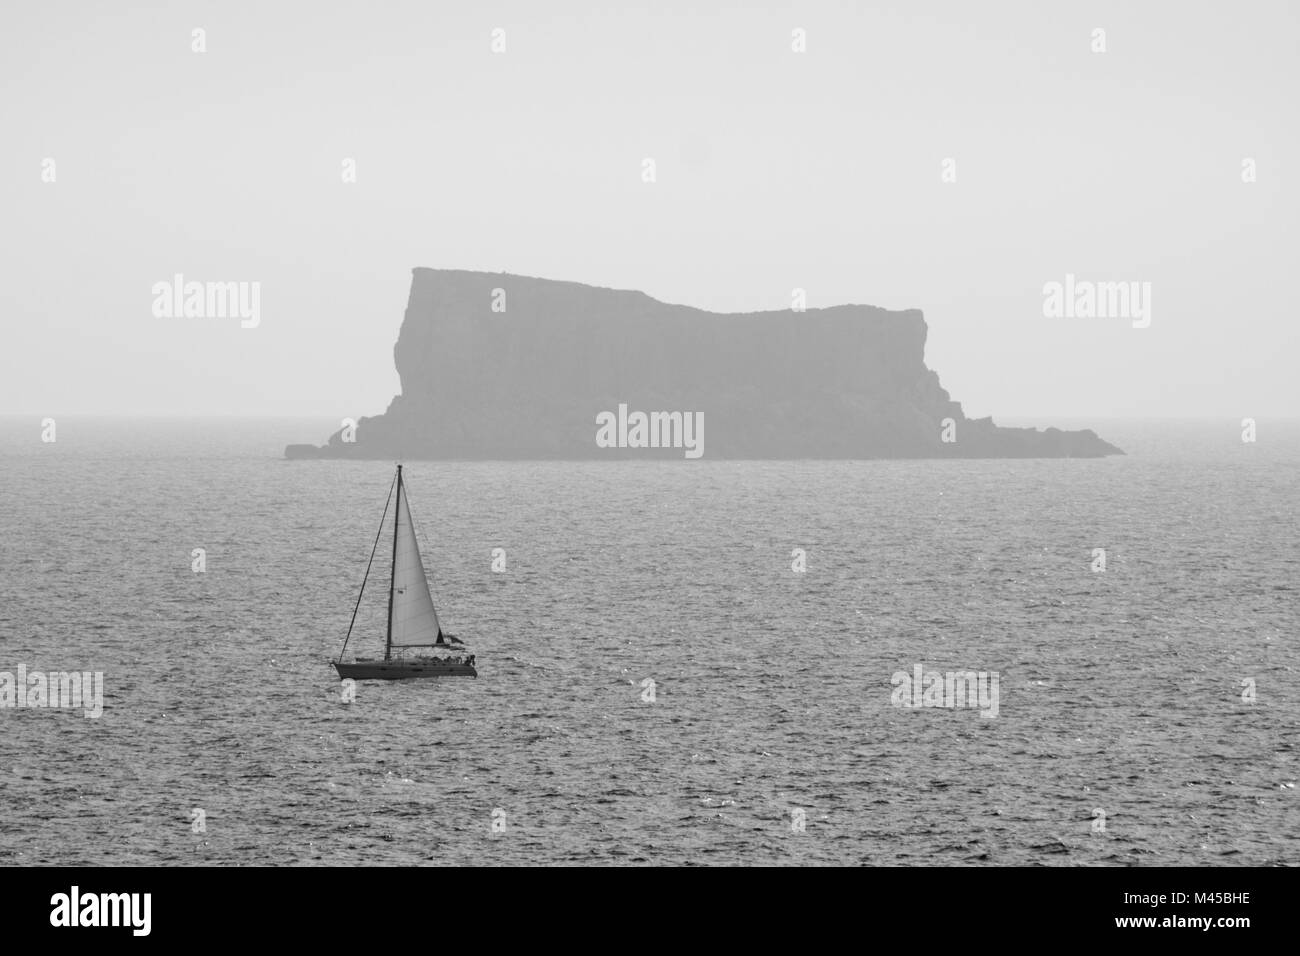 High angle view to a sailboat and a distant rocky island (Filfla, Malta). Stock Photo